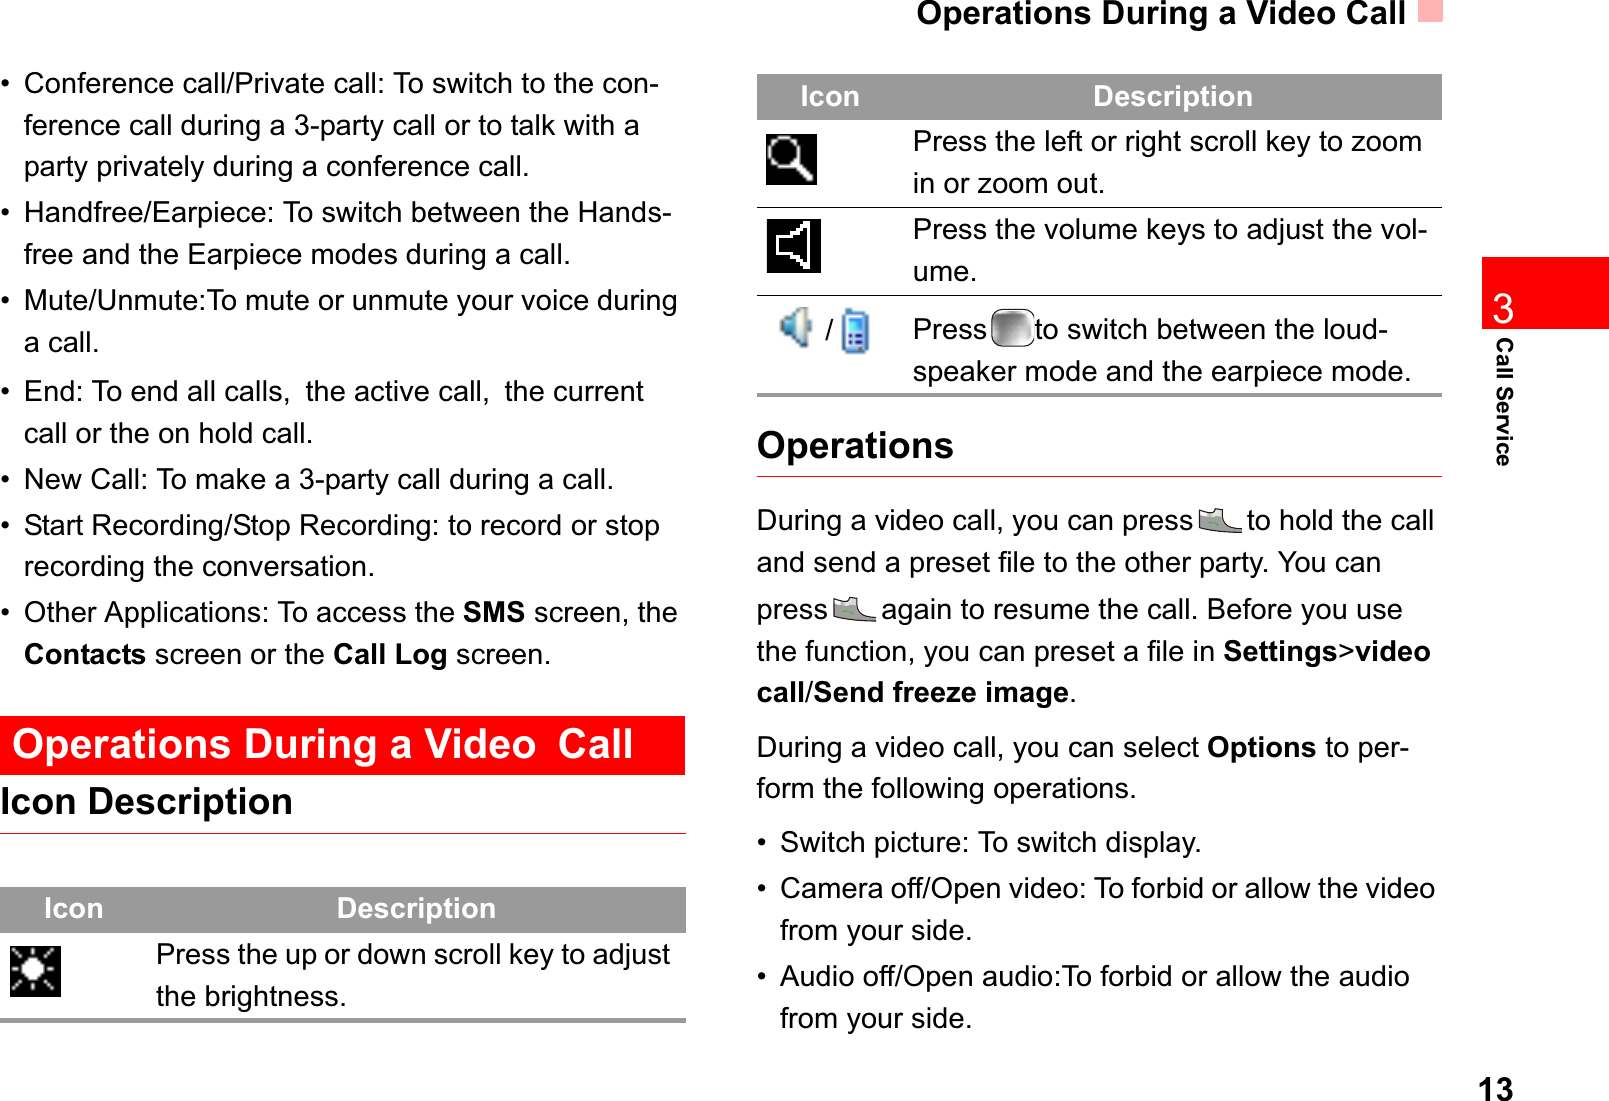 Operations During a Video Call133Call Service• Conference call/Private call: To switch to the con-ference call during a 3-party call or to talk with a party privately during a conference call.• Handfree/Earpiece: To switch between the Hands-free and the Earpiece modes during a call.• Mute/Unmute:To mute or unmute your voice during a call.• End: To end all calls,the active call,the current call or the on hold call.• New Call: To make a 3-party call during a call.• Start Recording/Stop Recording: to record or stop recording the conversation.• Other Applications: To access the SMS screen, the Contacts screen or the Call Log screen.Operations During a VideoCallIcon DescriptionOperationsDuring a video call, you can press to hold the call and send a preset file to the other party. You can press again to resume the call. Before you use the function, you can preset a file in Settings&gt;video call/Send freeze image.During a video call, you can select Options to per-form the following operations.• Switch picture: To switch display.• Camera off/Open video: To forbid or allow the video from your side.• Audio off/Open audio:To forbid or allow the audio from your side.Icon DescriptionPress the up or down scroll key to adjust the brightness.Press the left or right scroll key to zoom in or zoom out.Press the volume keys to adjust the vol-ume./Press to switch between the loud-speaker mode and the earpiece mode.Icon Description